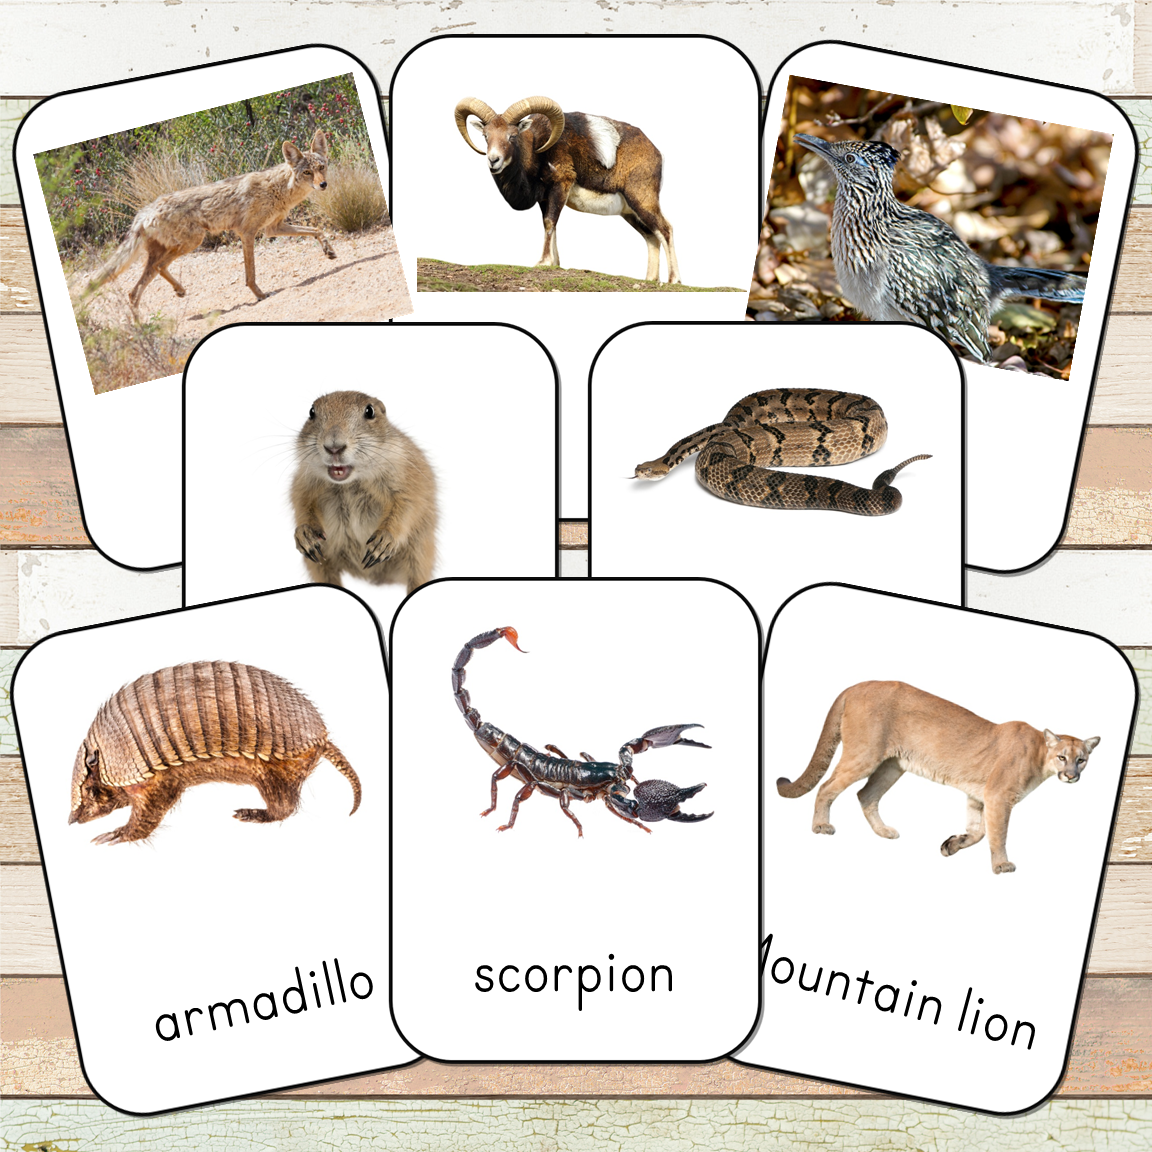 desert animals with names